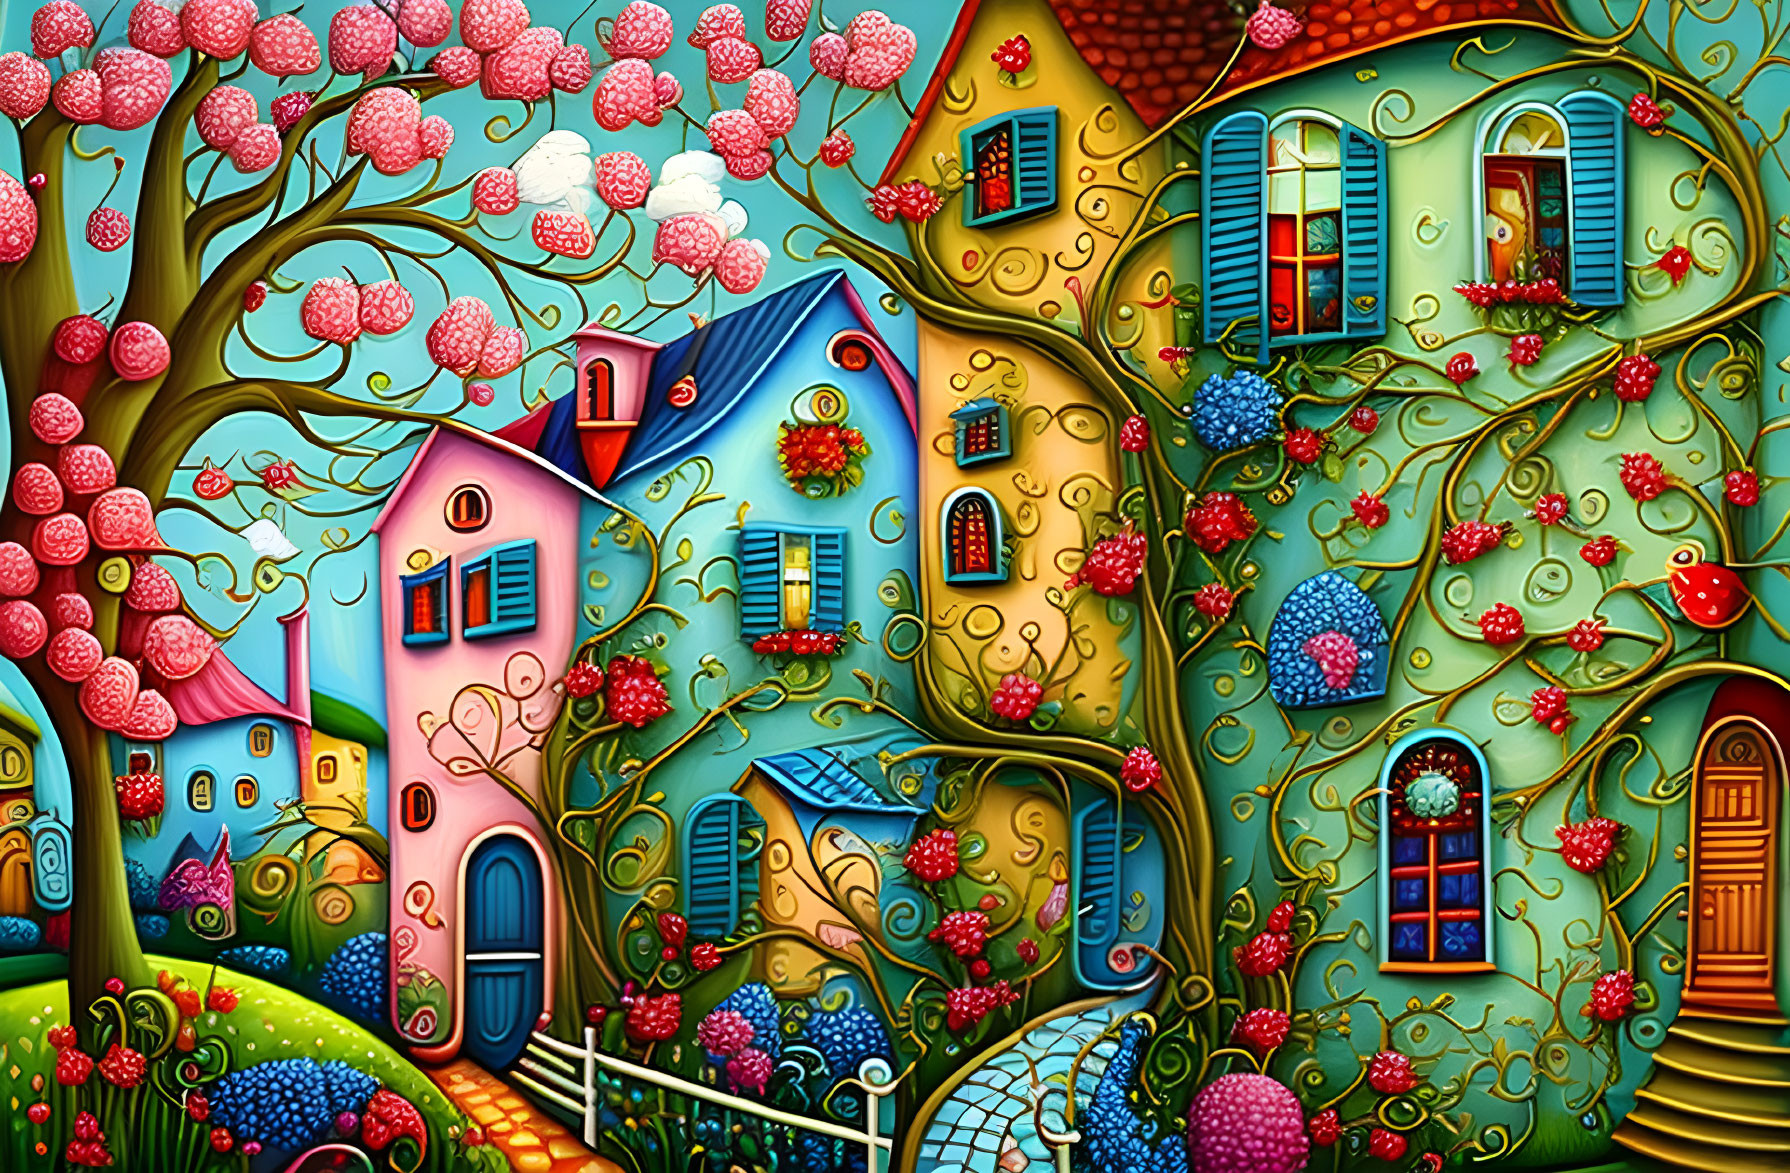 Colorful painting of whimsical village with flowering tree